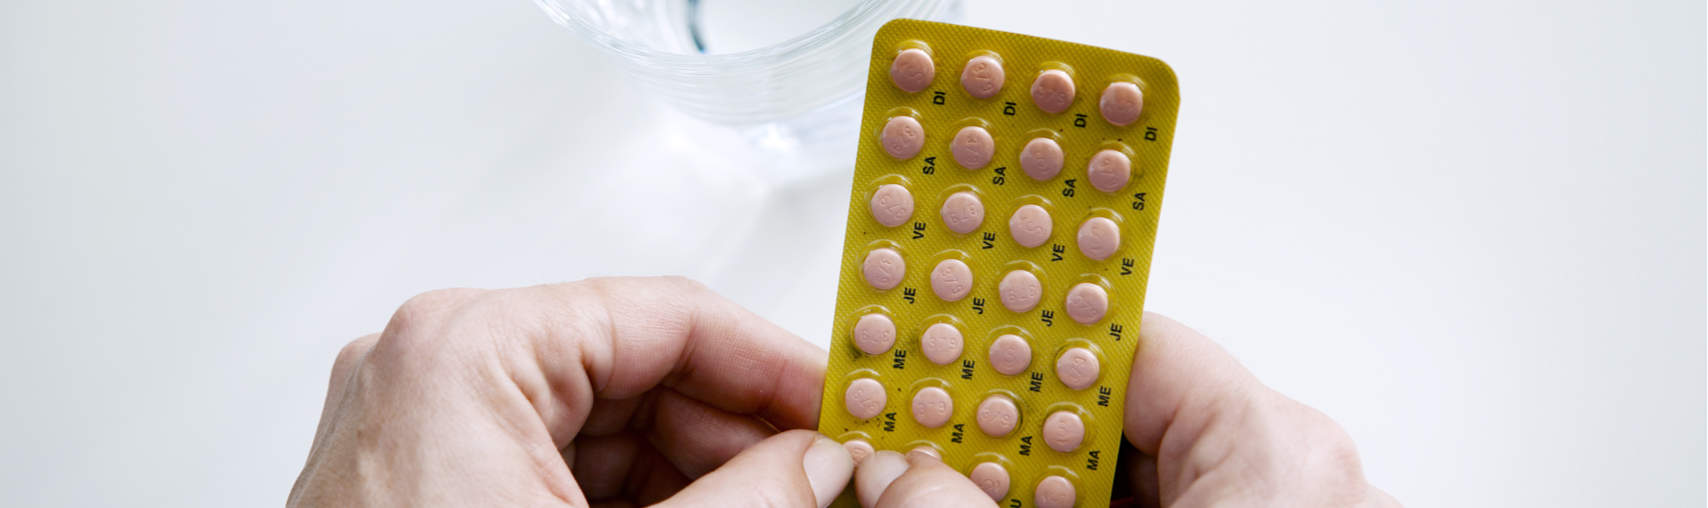 Are women who take HRT tablets more at risk of blood clots?